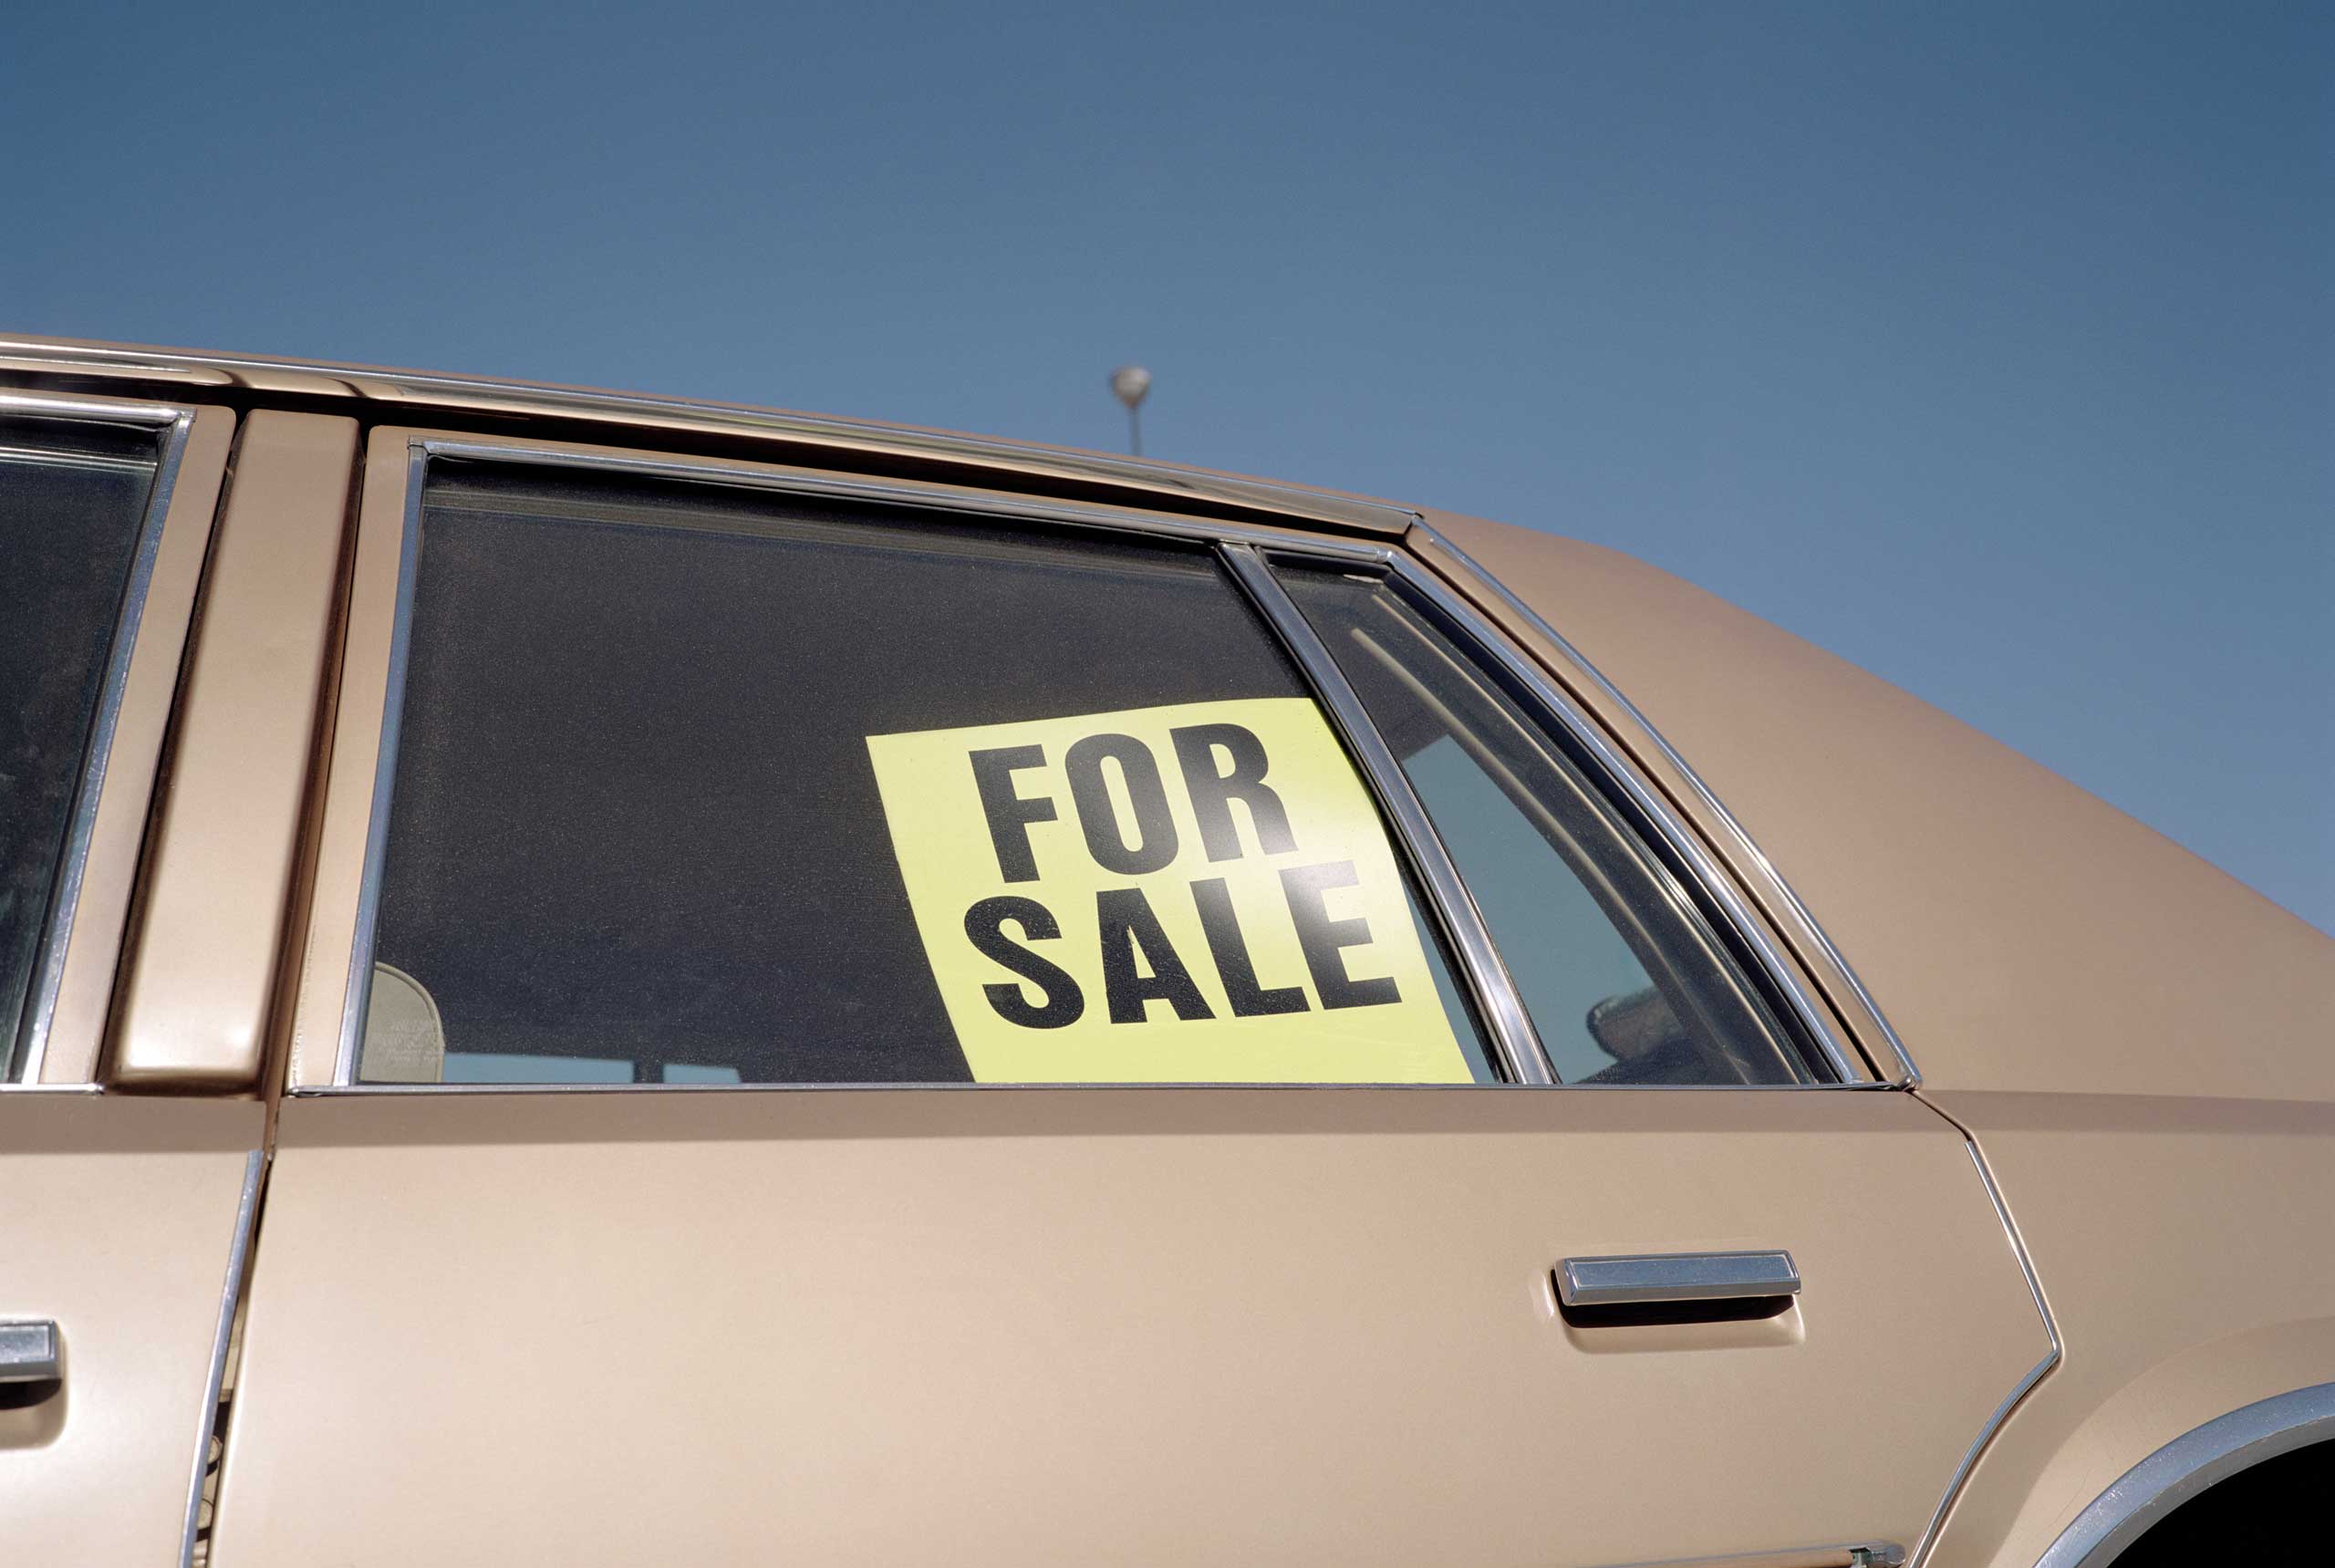 'For Sale' sign placed in car window, outdoors, close-up